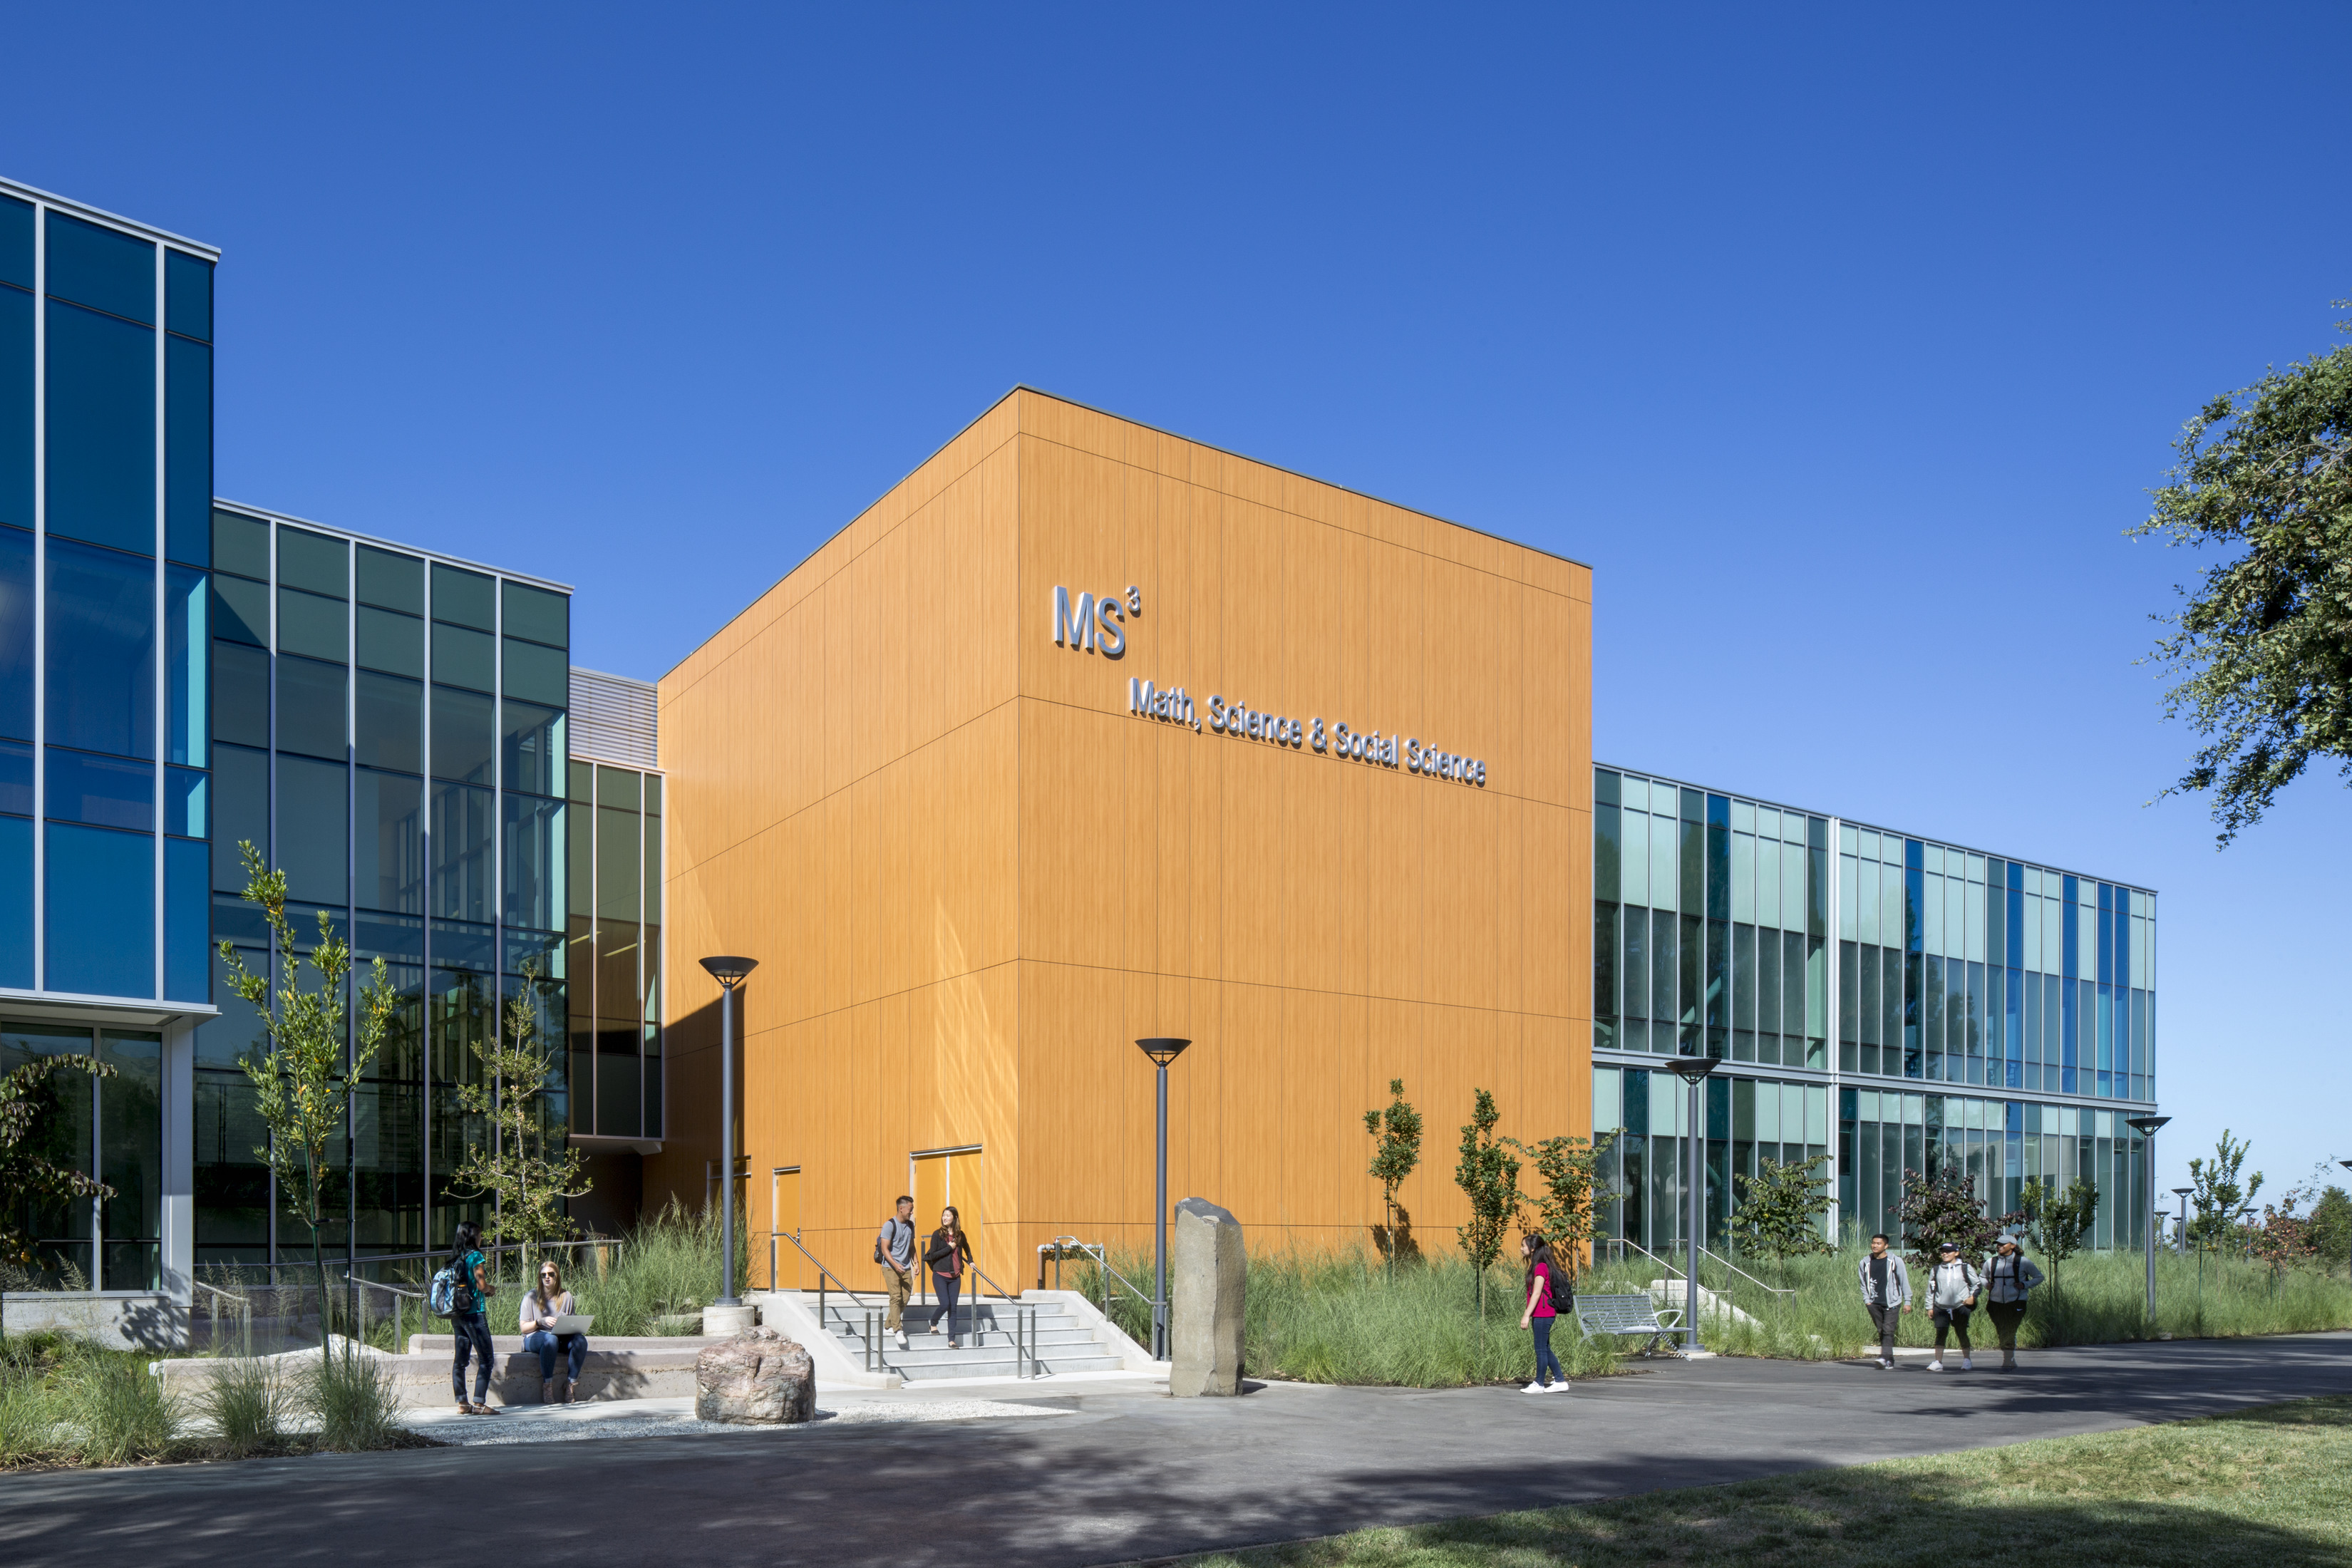 Evergreen Valley College Math, Science, and Social Science Building  Achieves LEED Platinum Certification | Awards, Higher Education,  Sustainability | HMC Architects